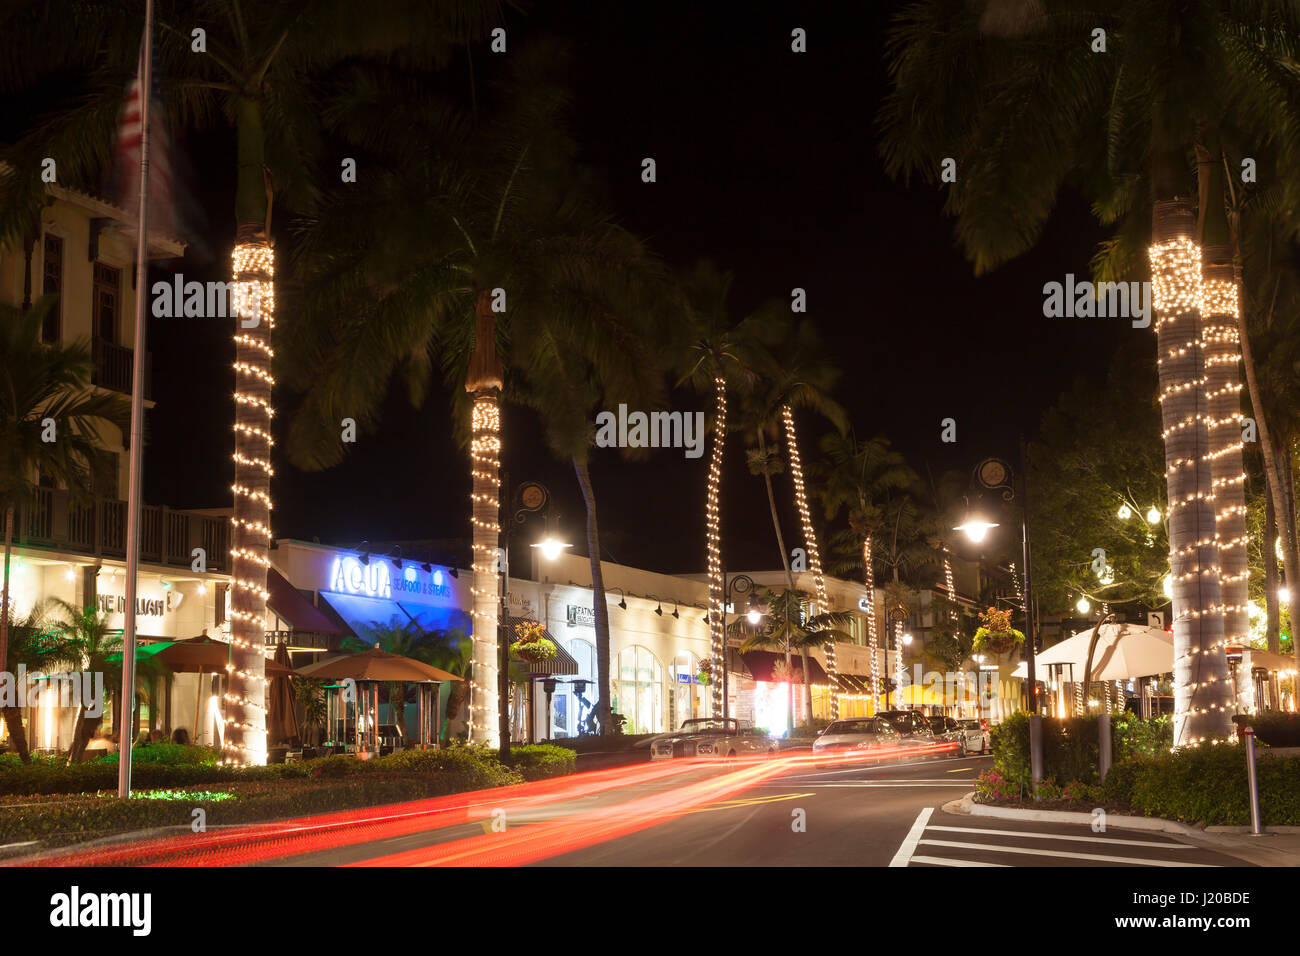 Naples, Fl, USA - March 21, 2017: Street in the city of Naples illuminated at night. Florida, United States Stock Photo